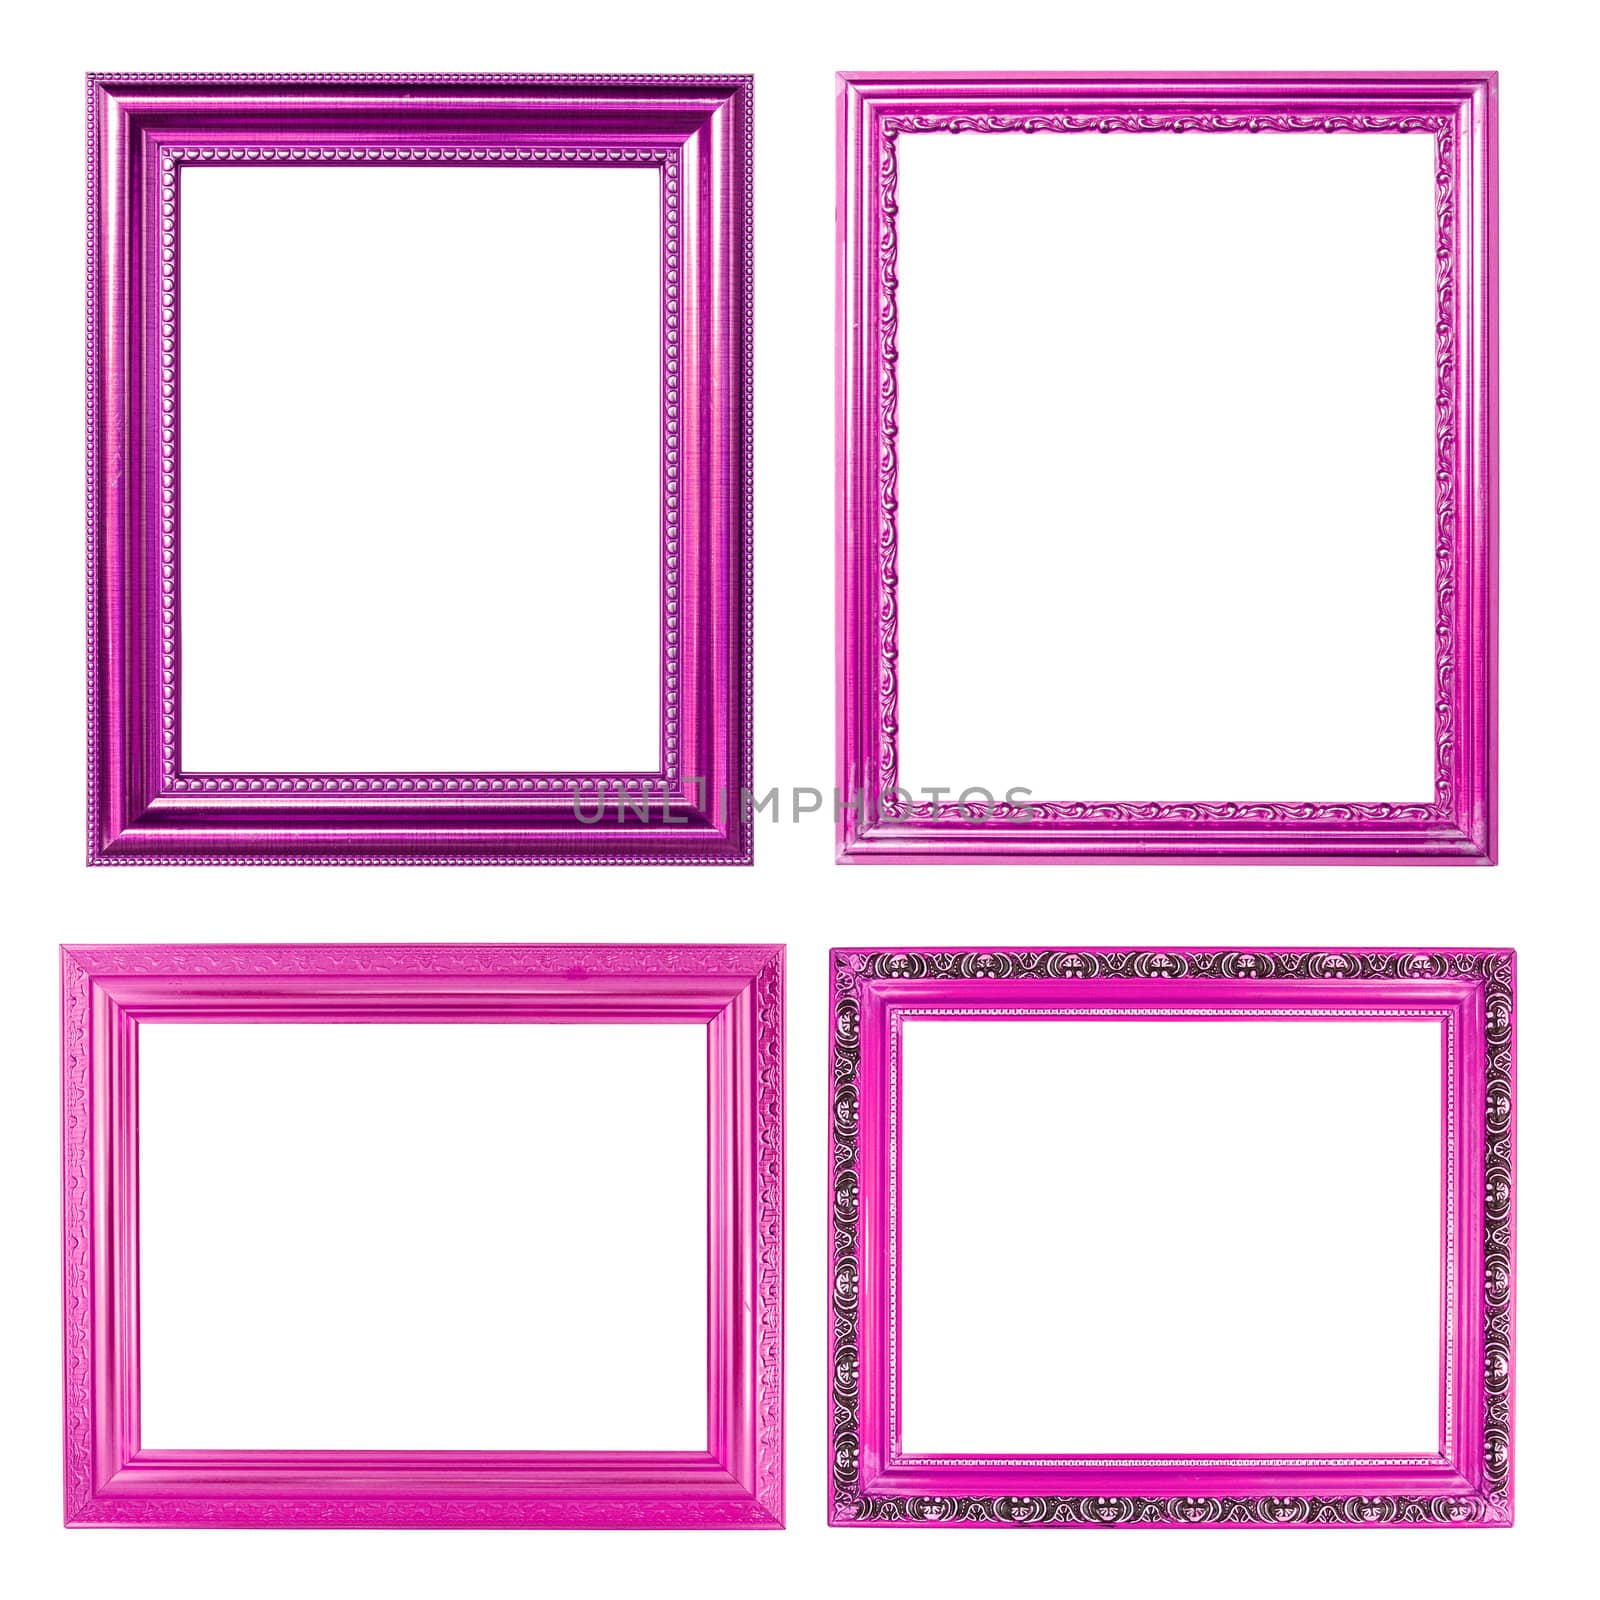 4 pink frame on white by geargodz